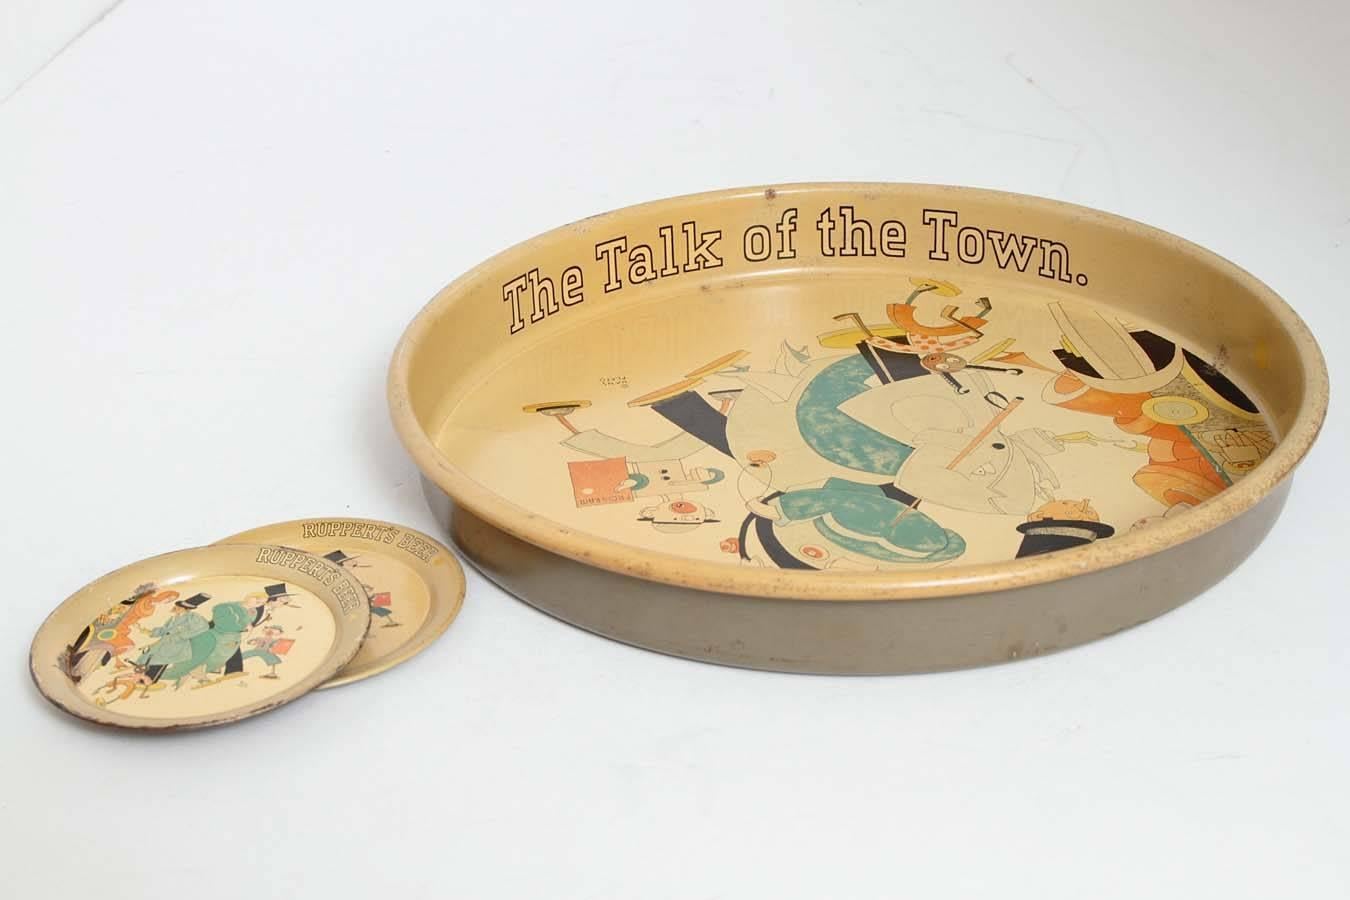 Art Deco Cubist Jazz Age Cocktail Tray or Tip Coaster Collection Ruppert's Beer For Sale